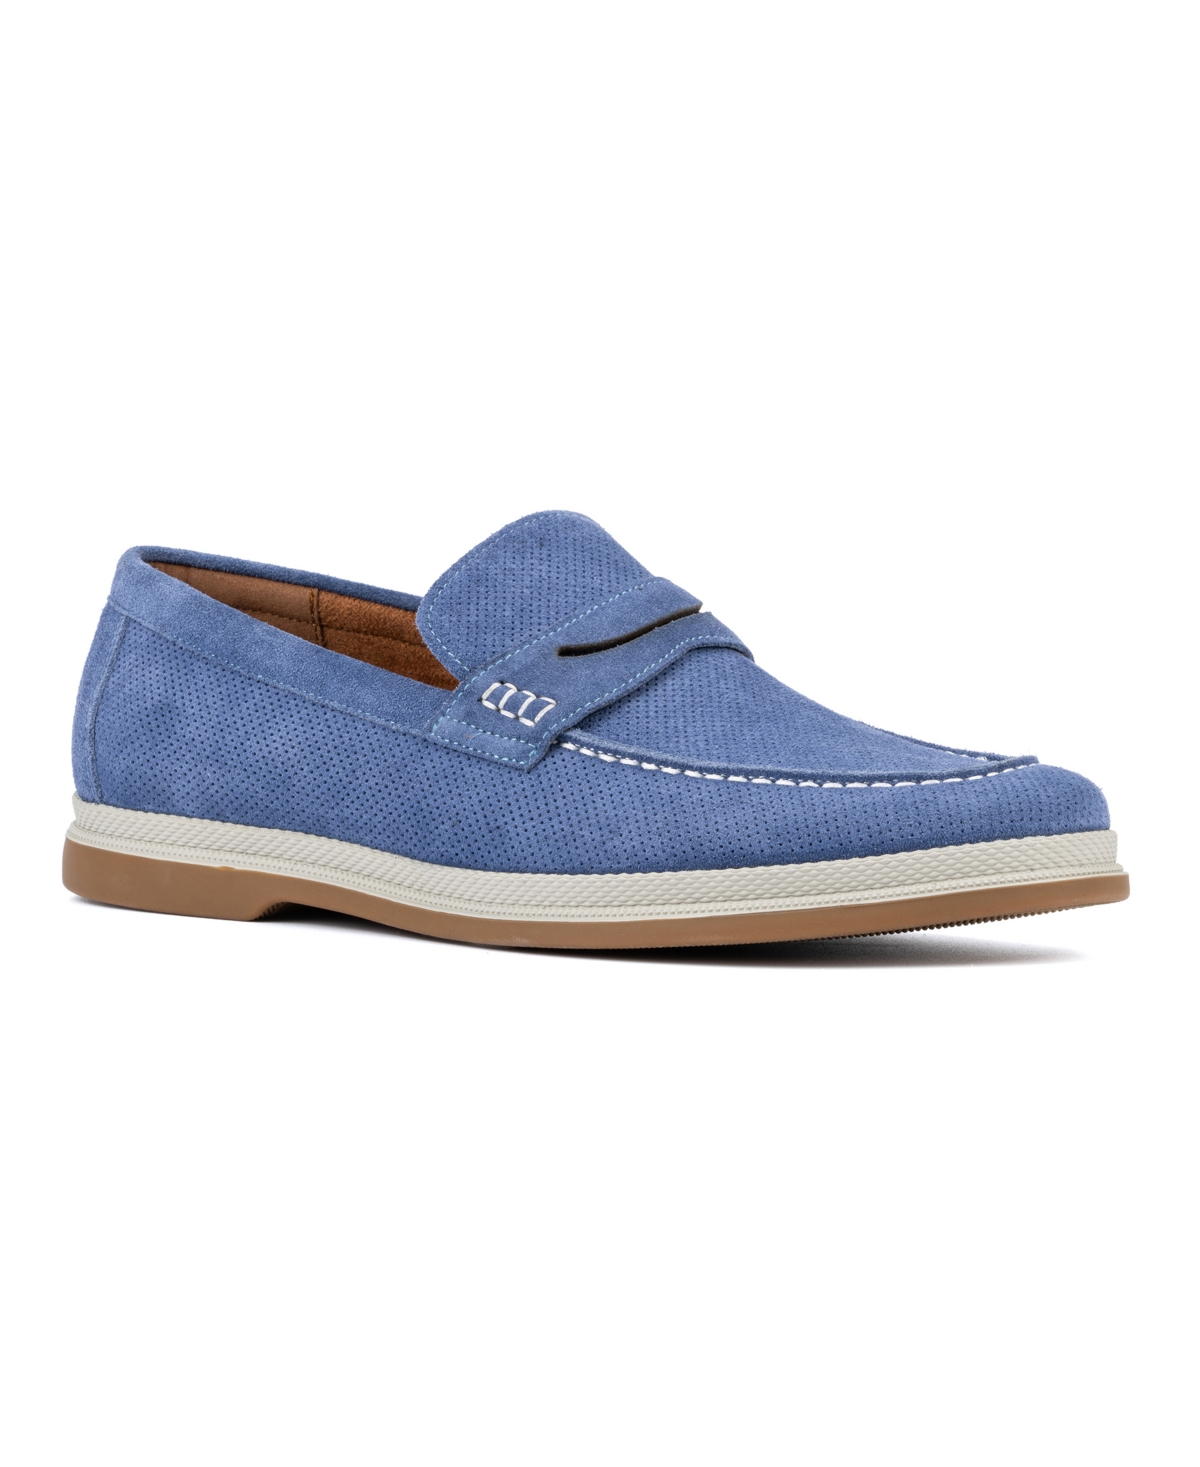 Vintage Foundry Co Men's Menahan Slip-on Loafers In Blue